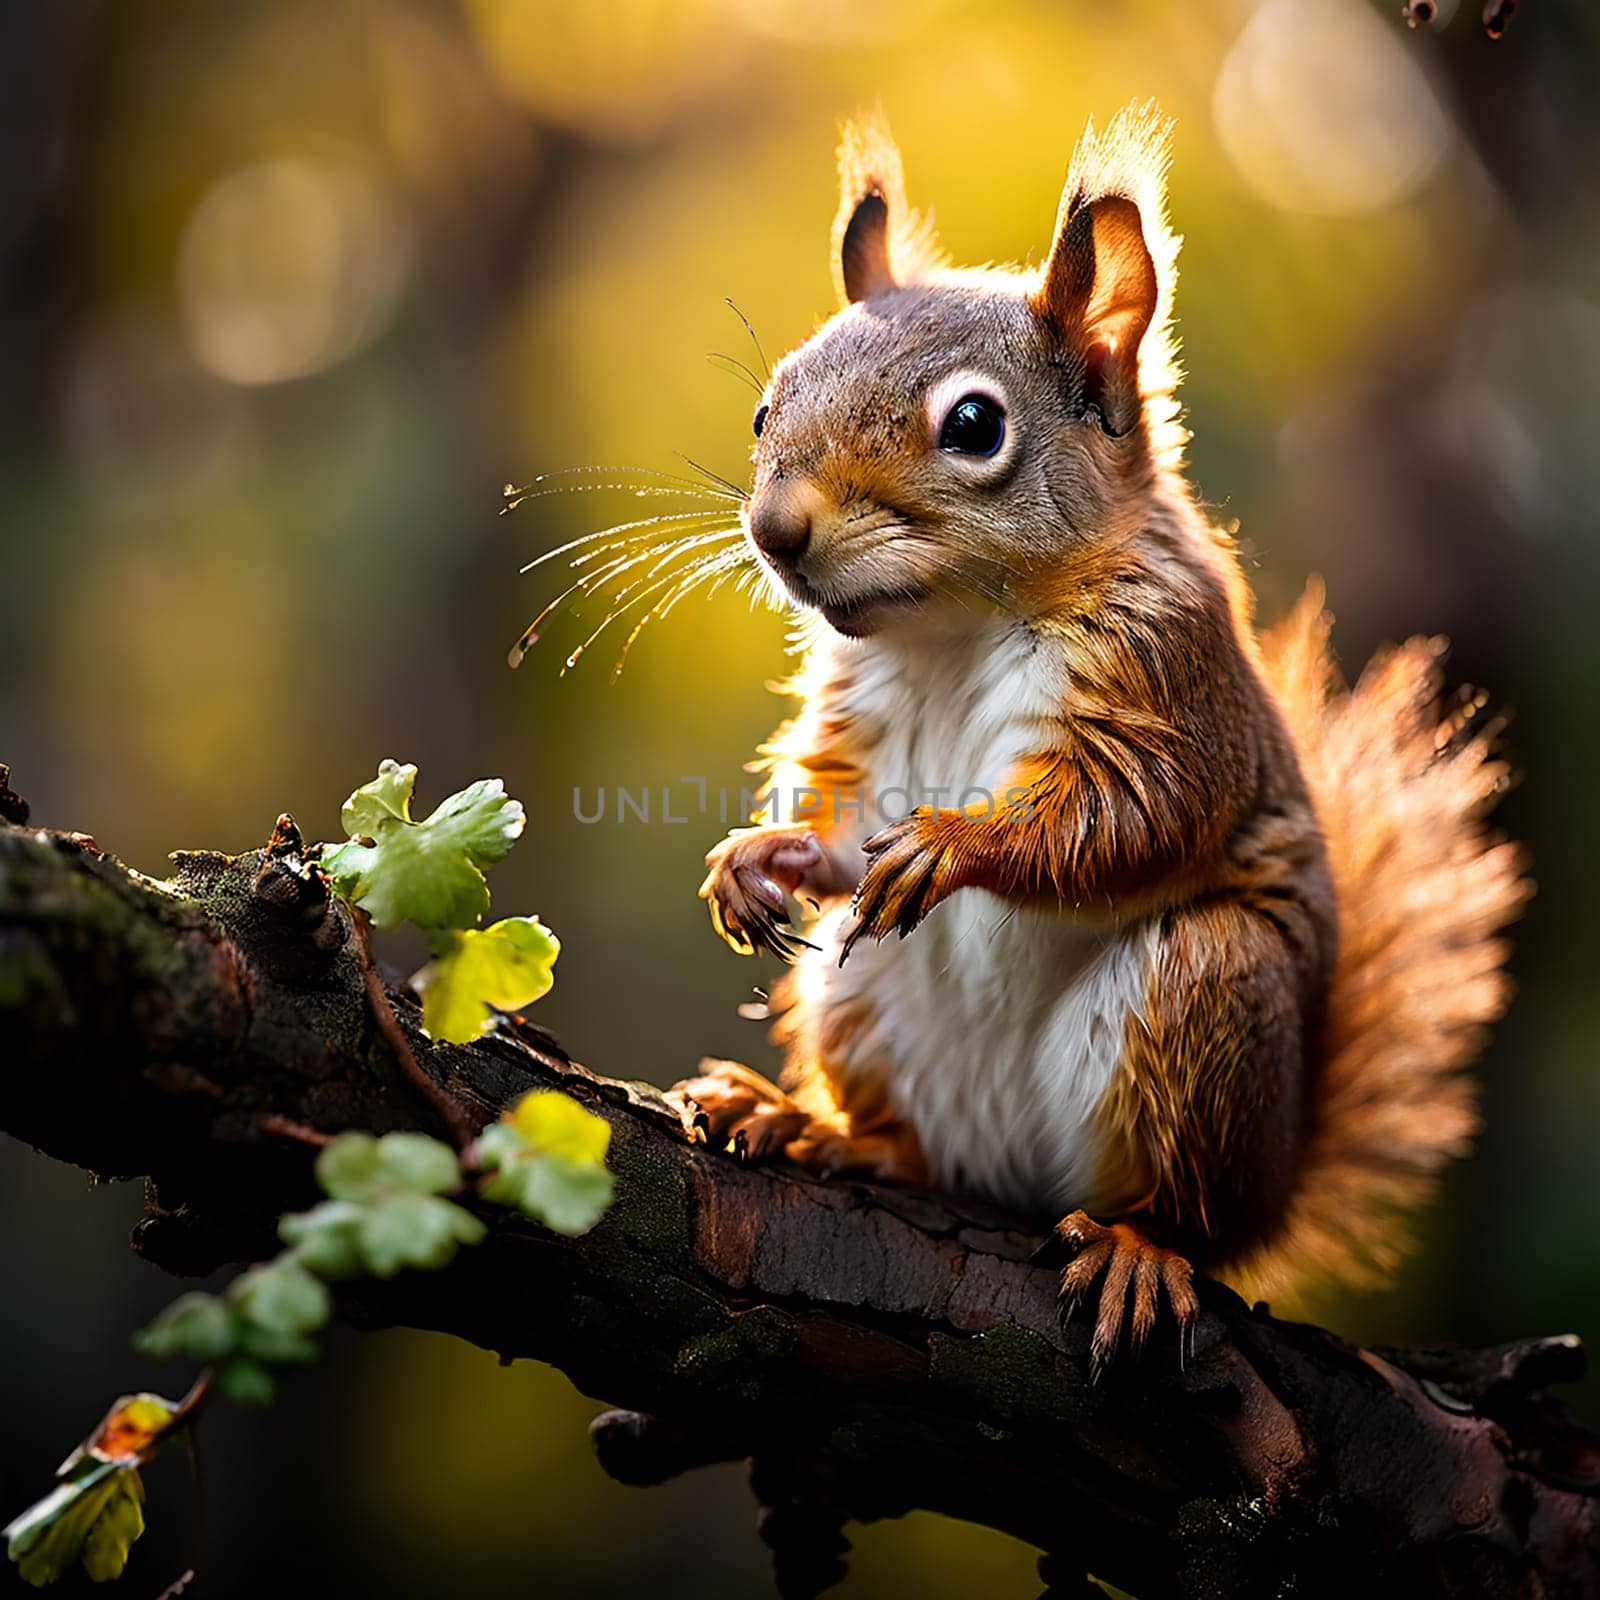 Nature's Acrobats: Capturing the Agile Squirrel on a Tree Branch